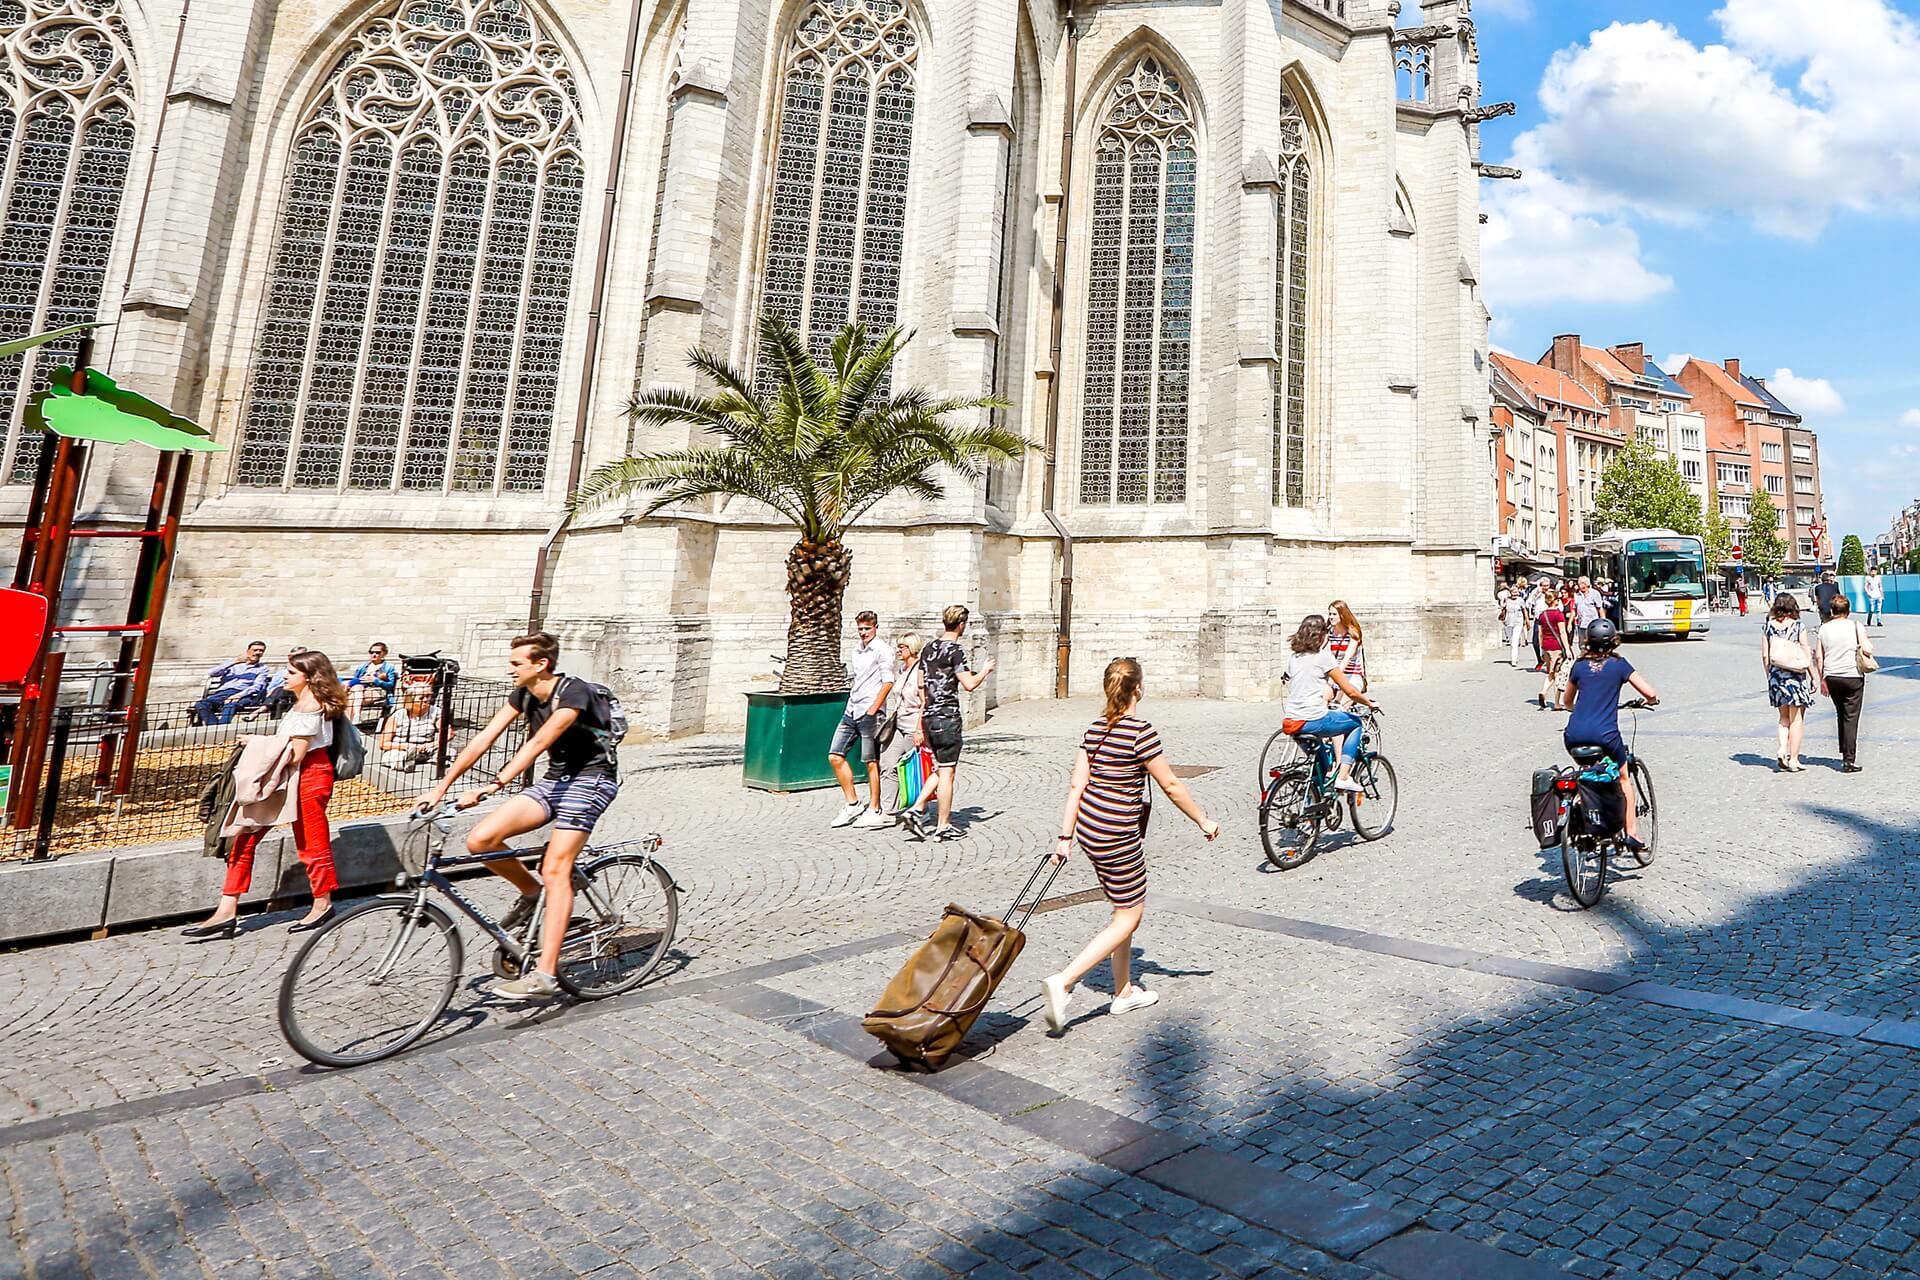 Meet KU Leuven: actions, ambitions & the future of urban mobility